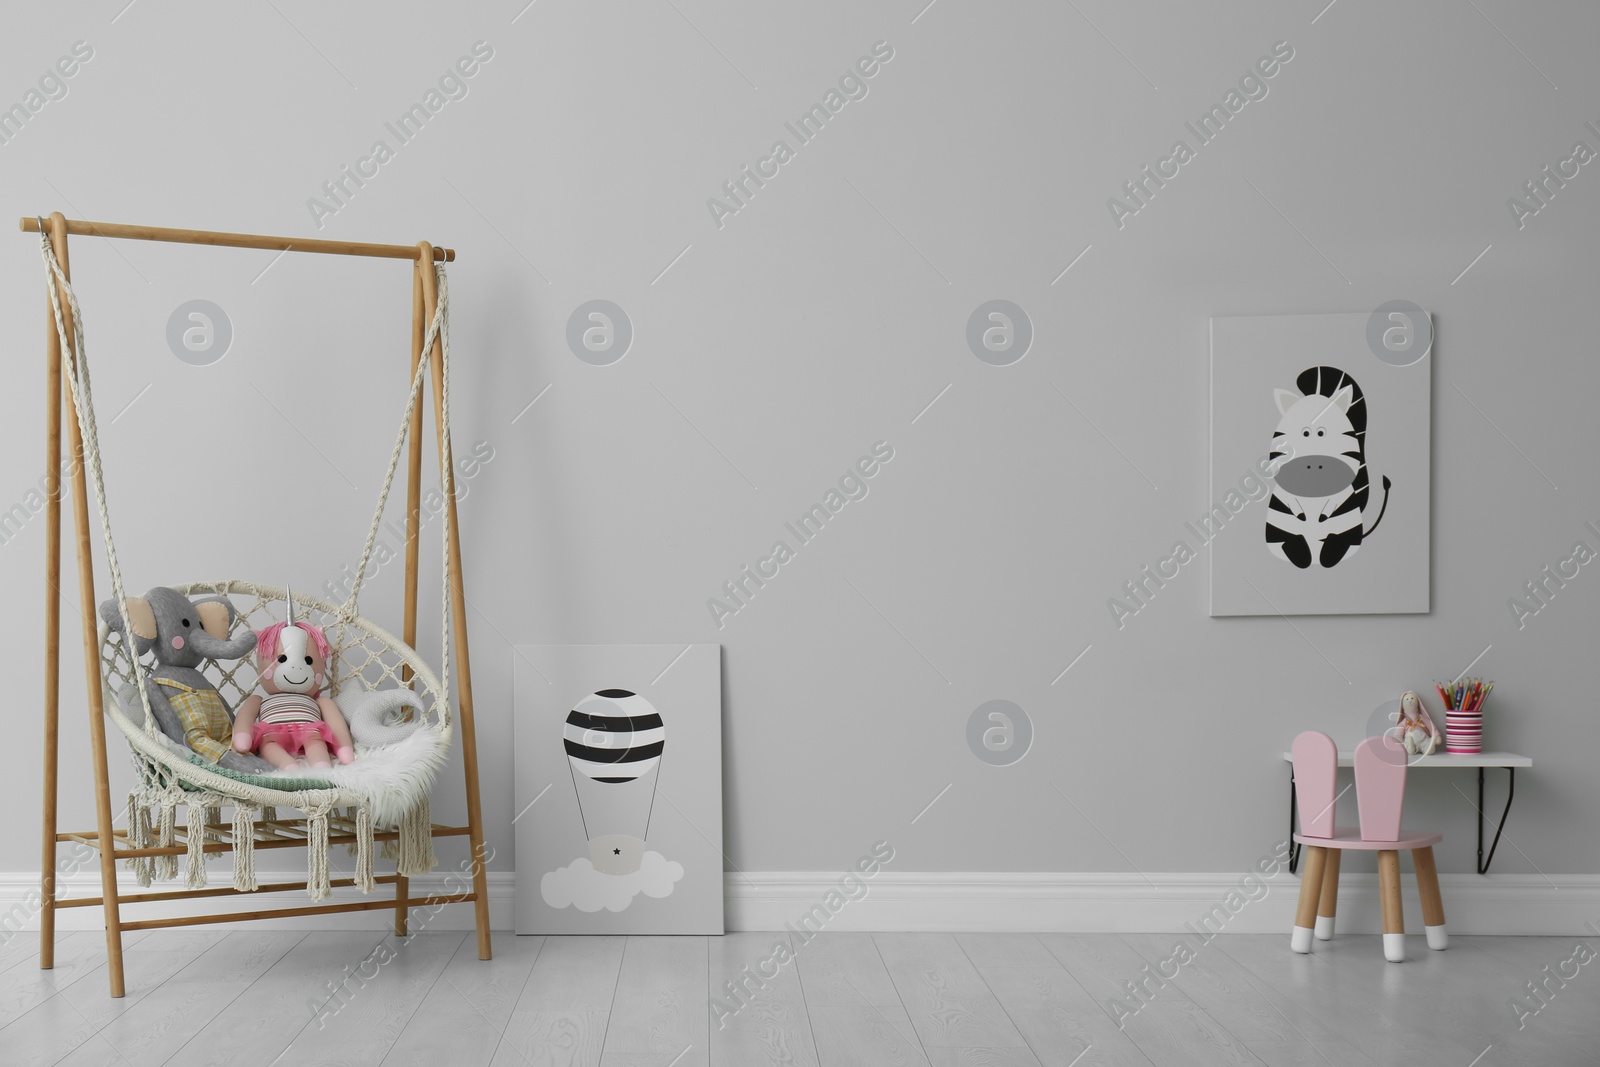 Photo of Stylish child's room interior with adorable paintings and hanging chair